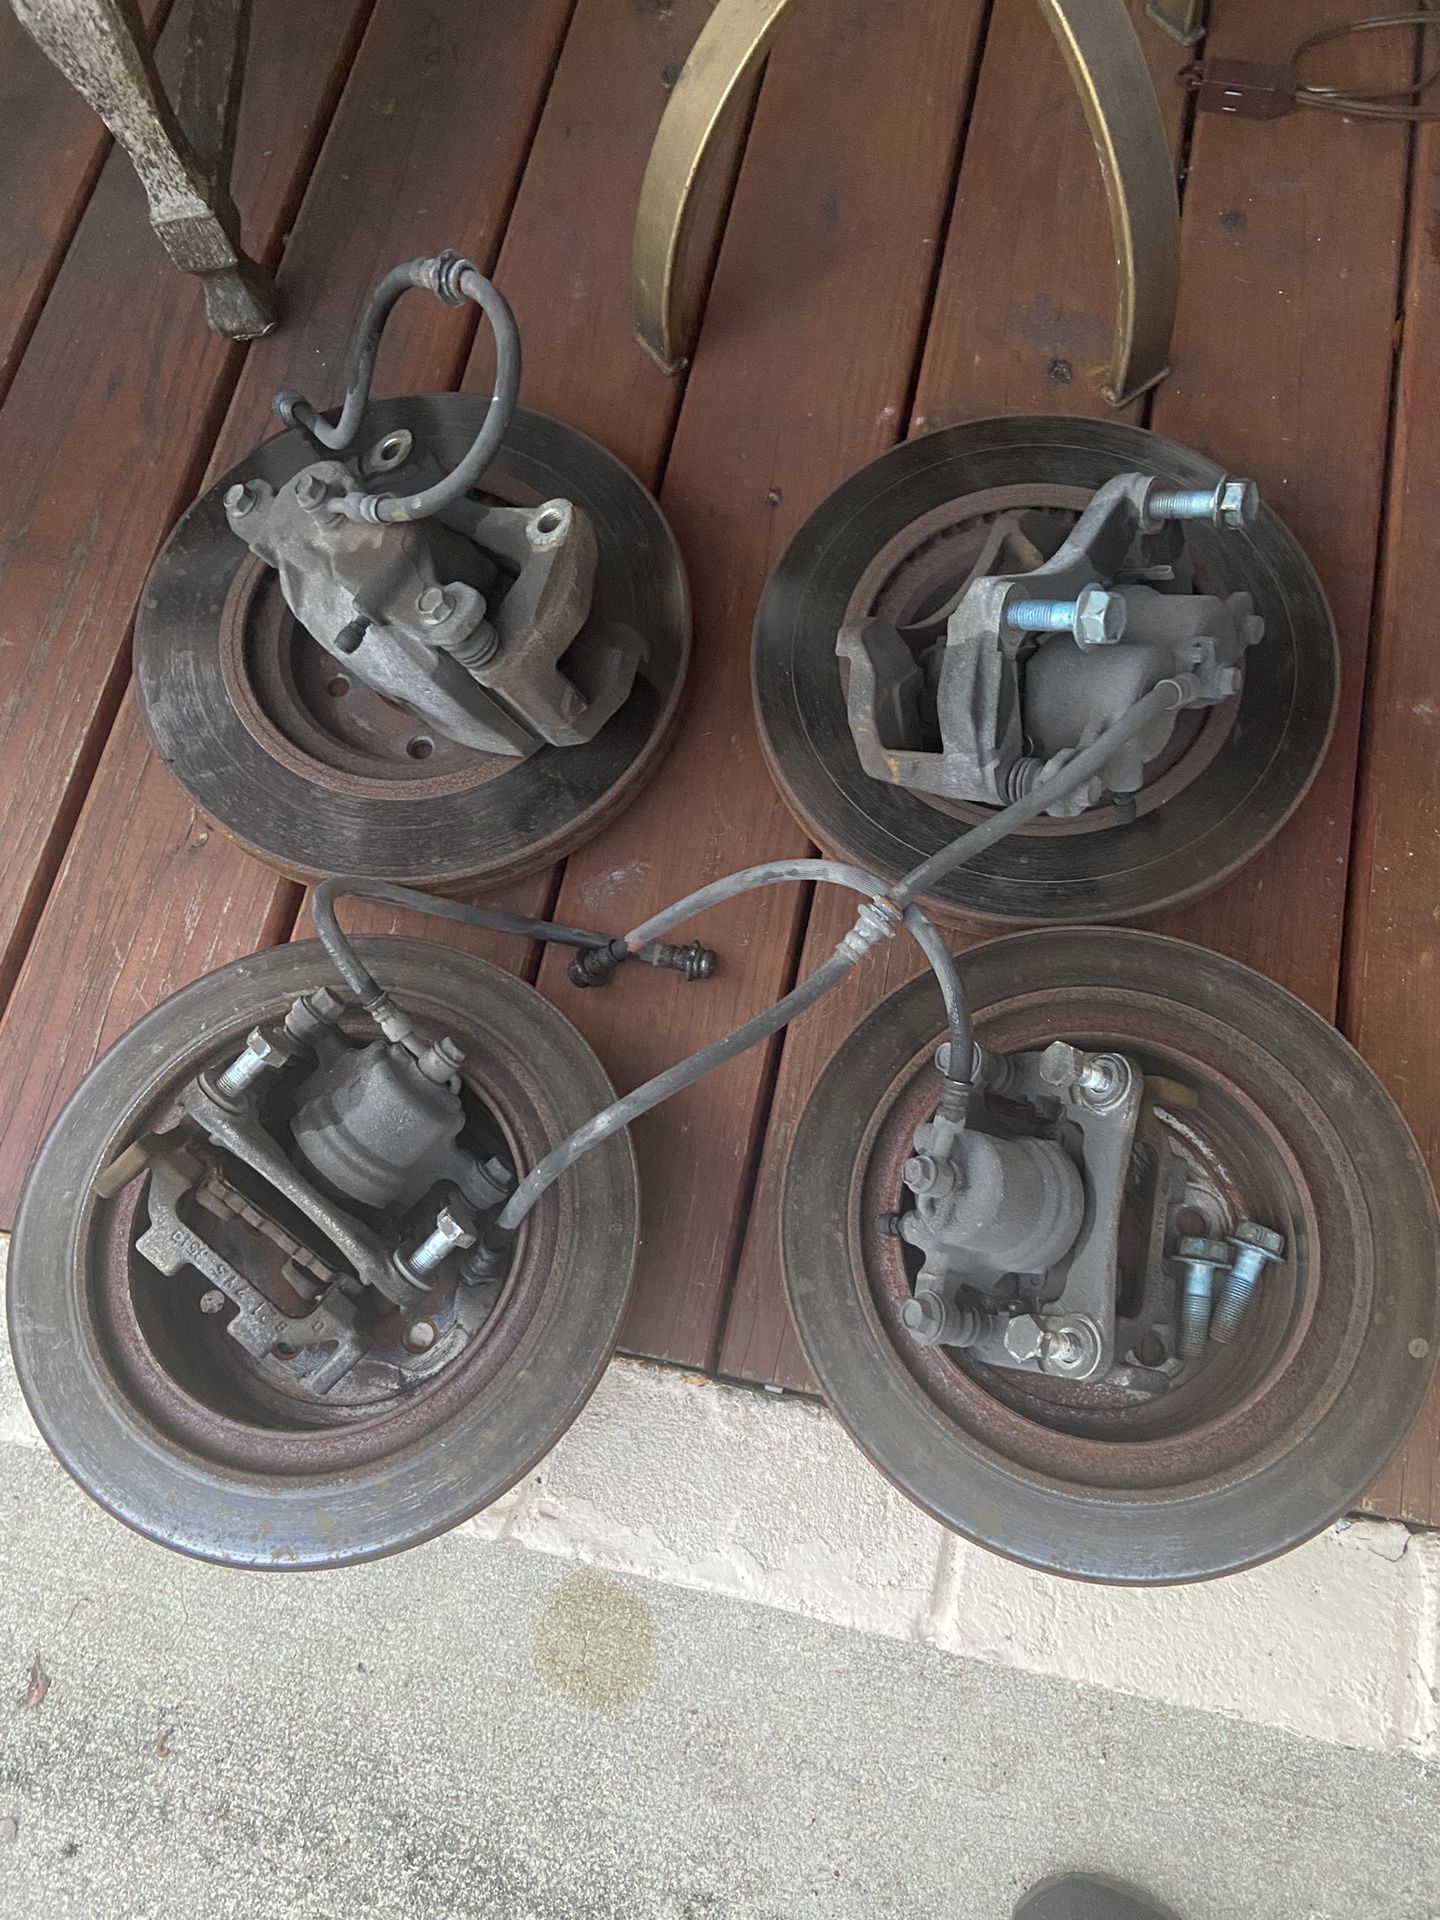 2018 Q50 Brakes Calipers And Rotors (used)